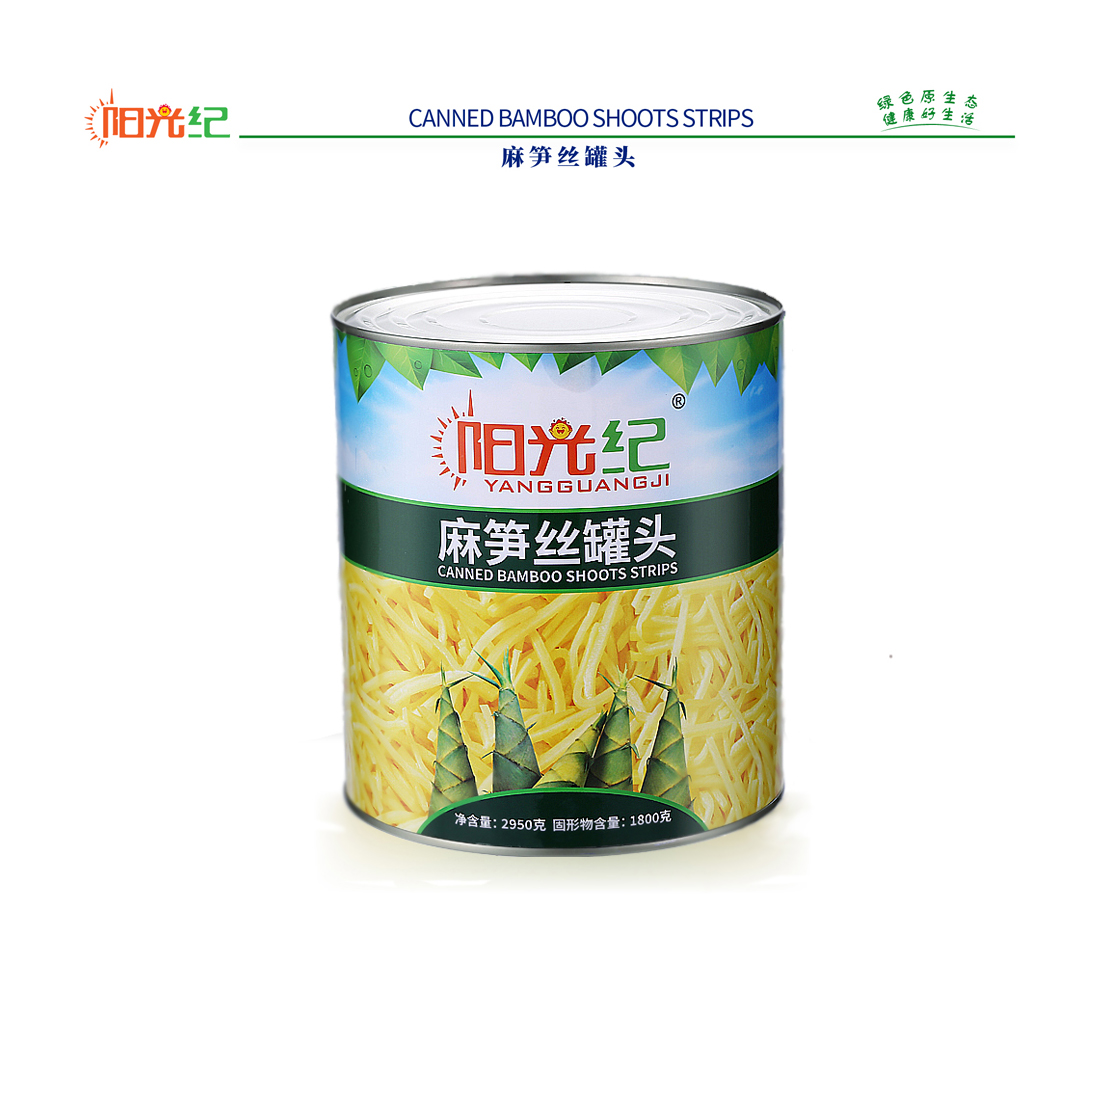 OEM CUSTOMIZED CANNED BAMBOO SHOOTS STRIPS